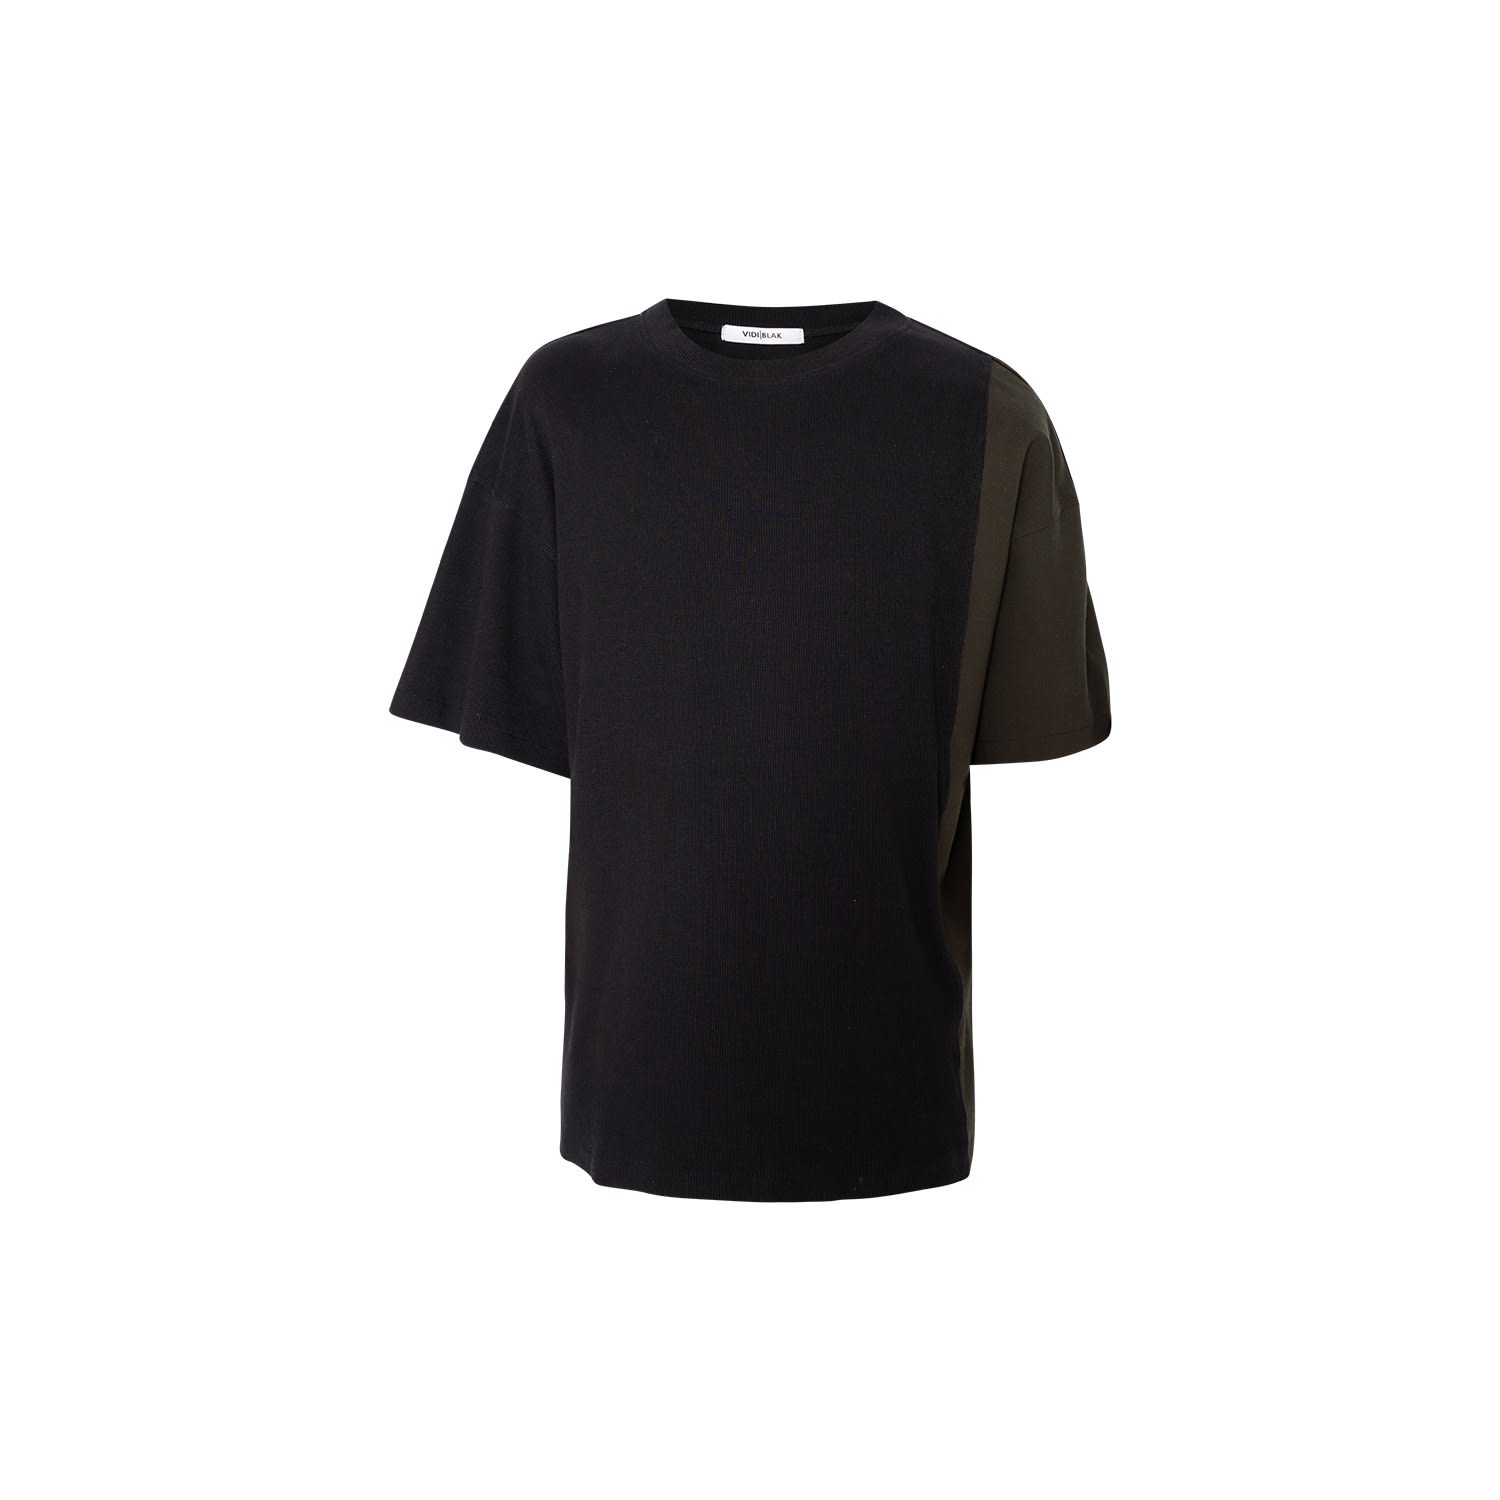 Men’s T-Shirt In Texturized Black Rib With Contrast Military Green Side Panel Extra Small Vidi Blak